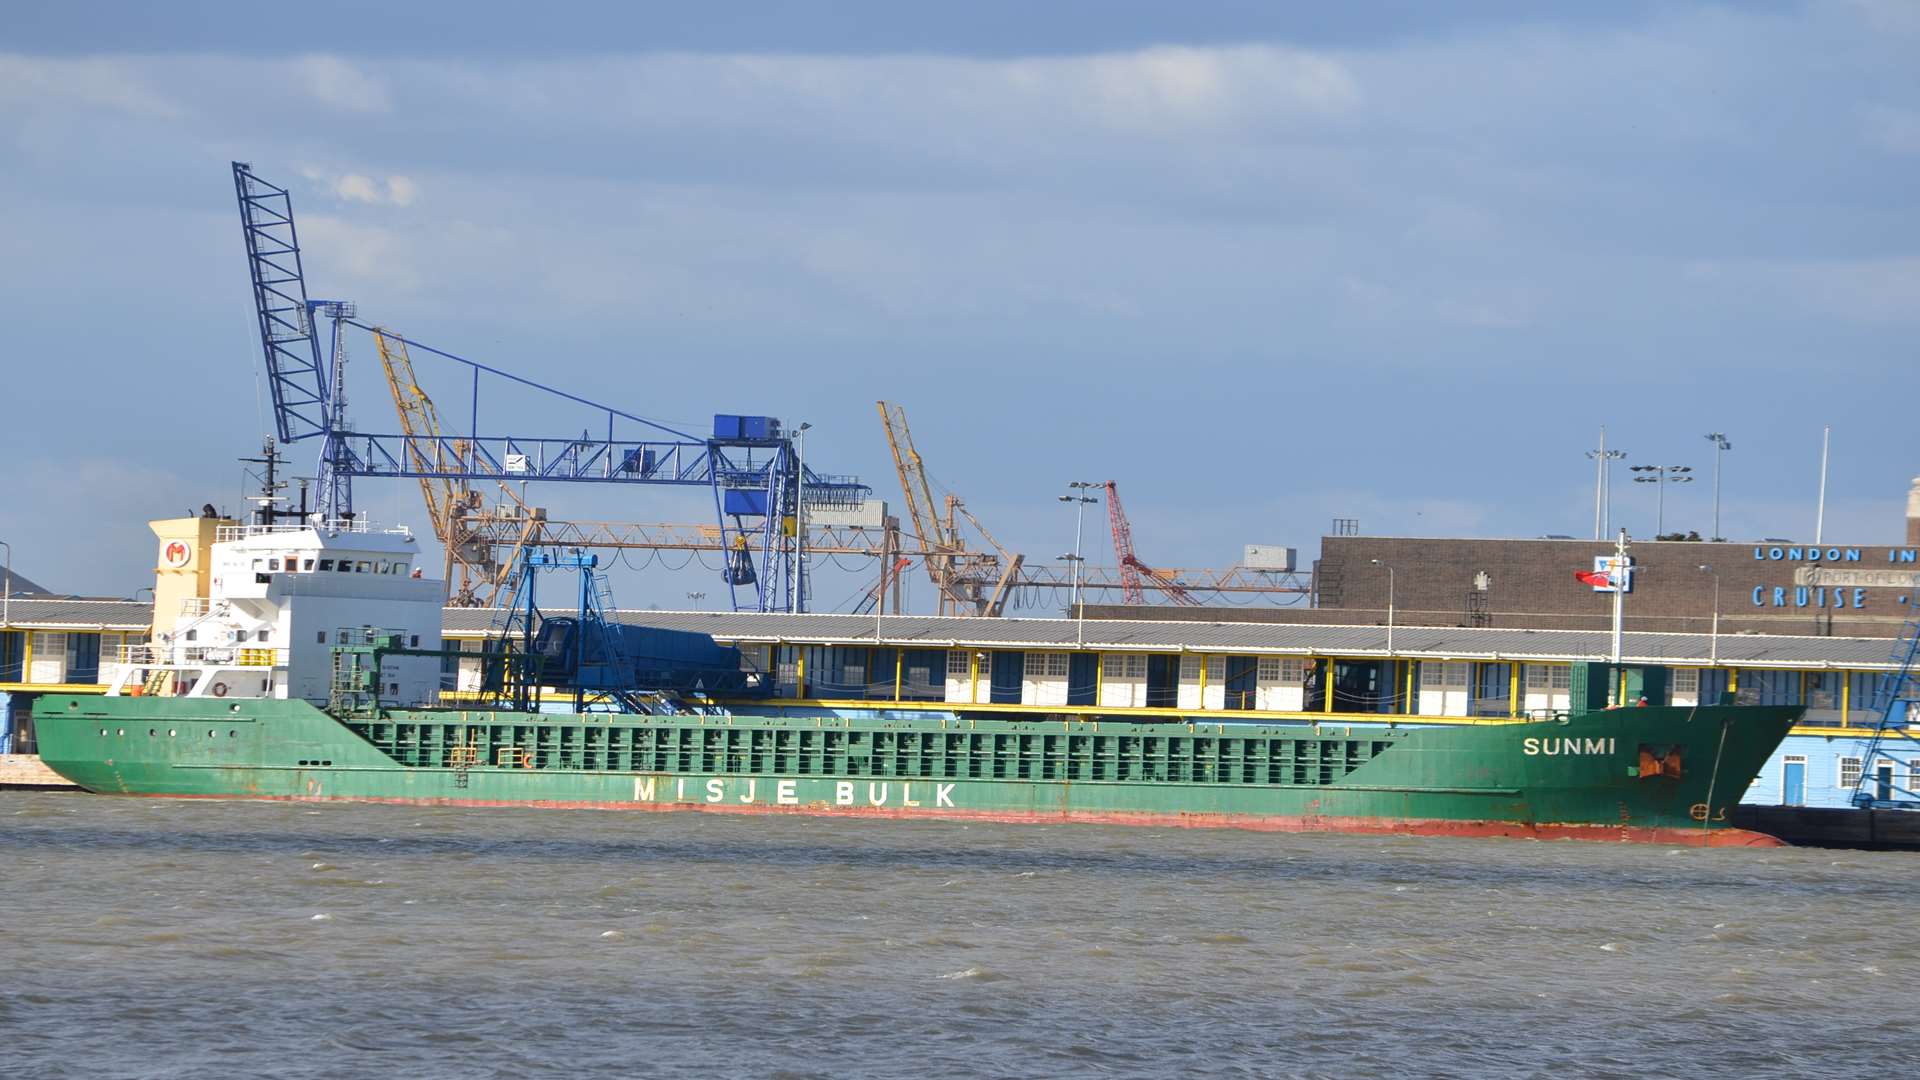 The Sunmi, moored at Tilbury opposite Gravesend, on Thursday afternoon.